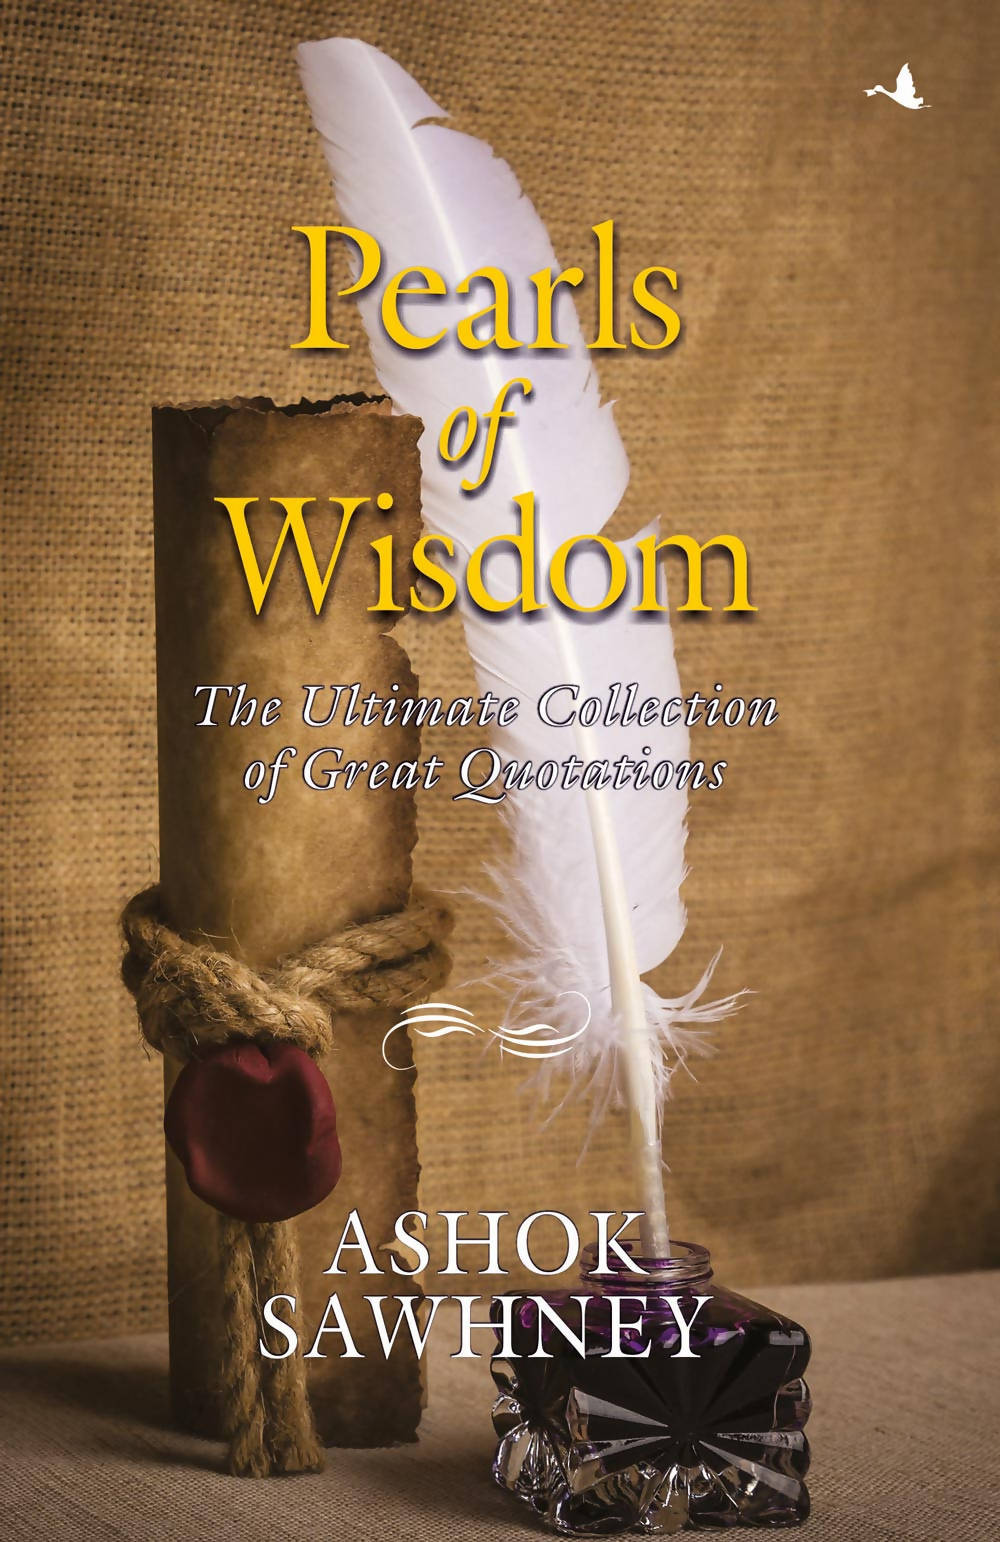 Pearls of Wisdom: The Ultimate collection f Great Quotations